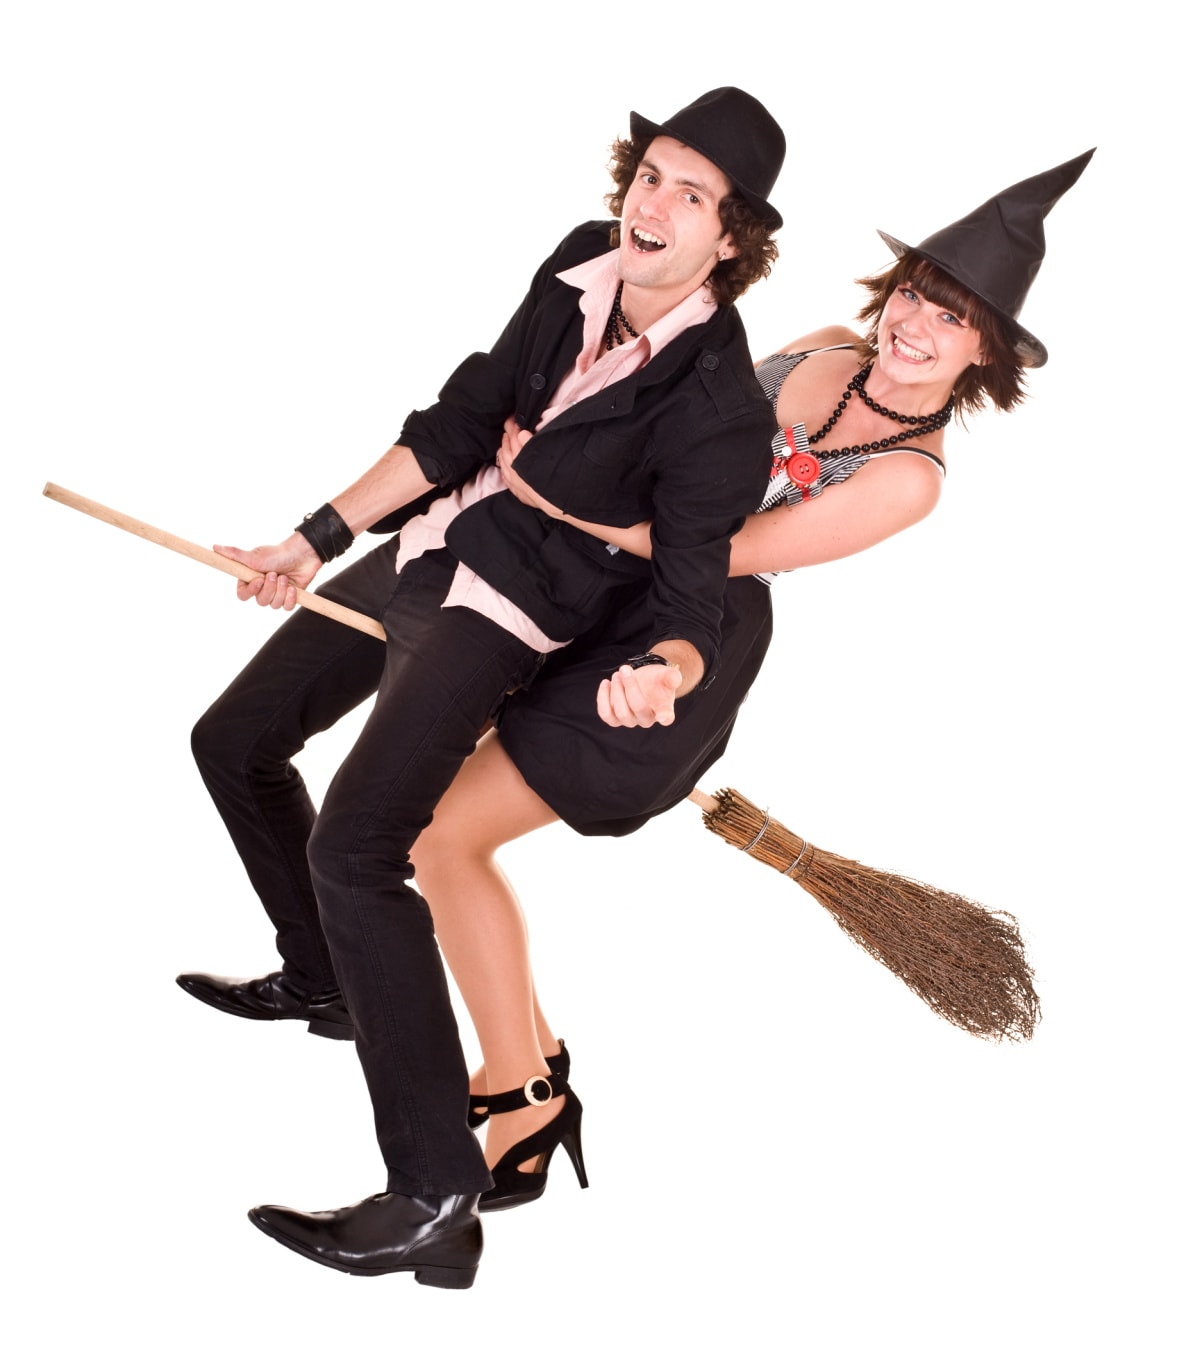 A man and woman riding a broom on a white background.